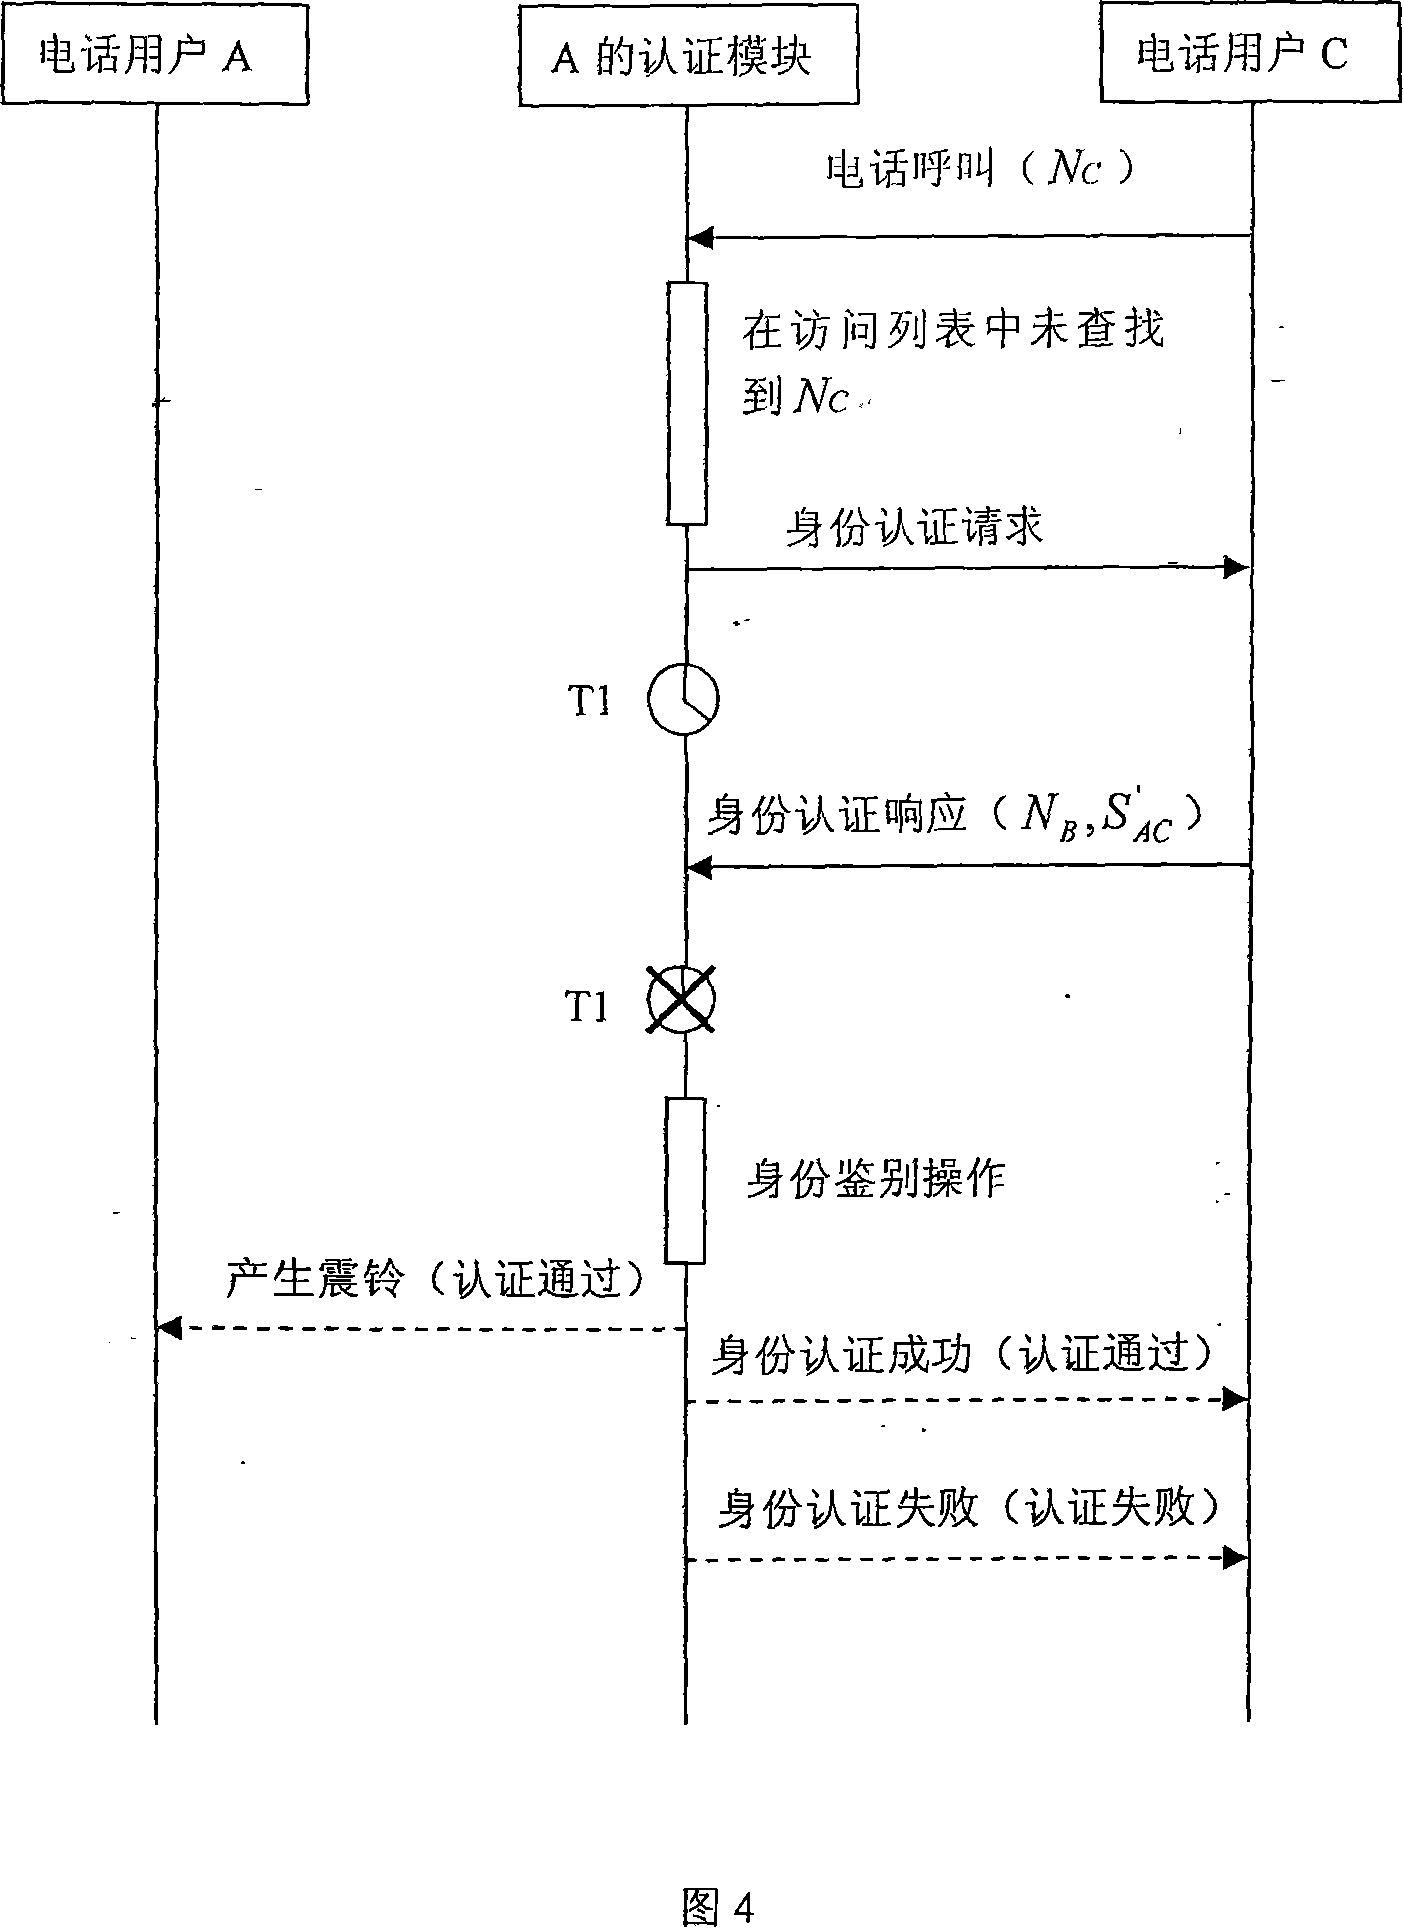 Authentication method for telephone subscriber identity